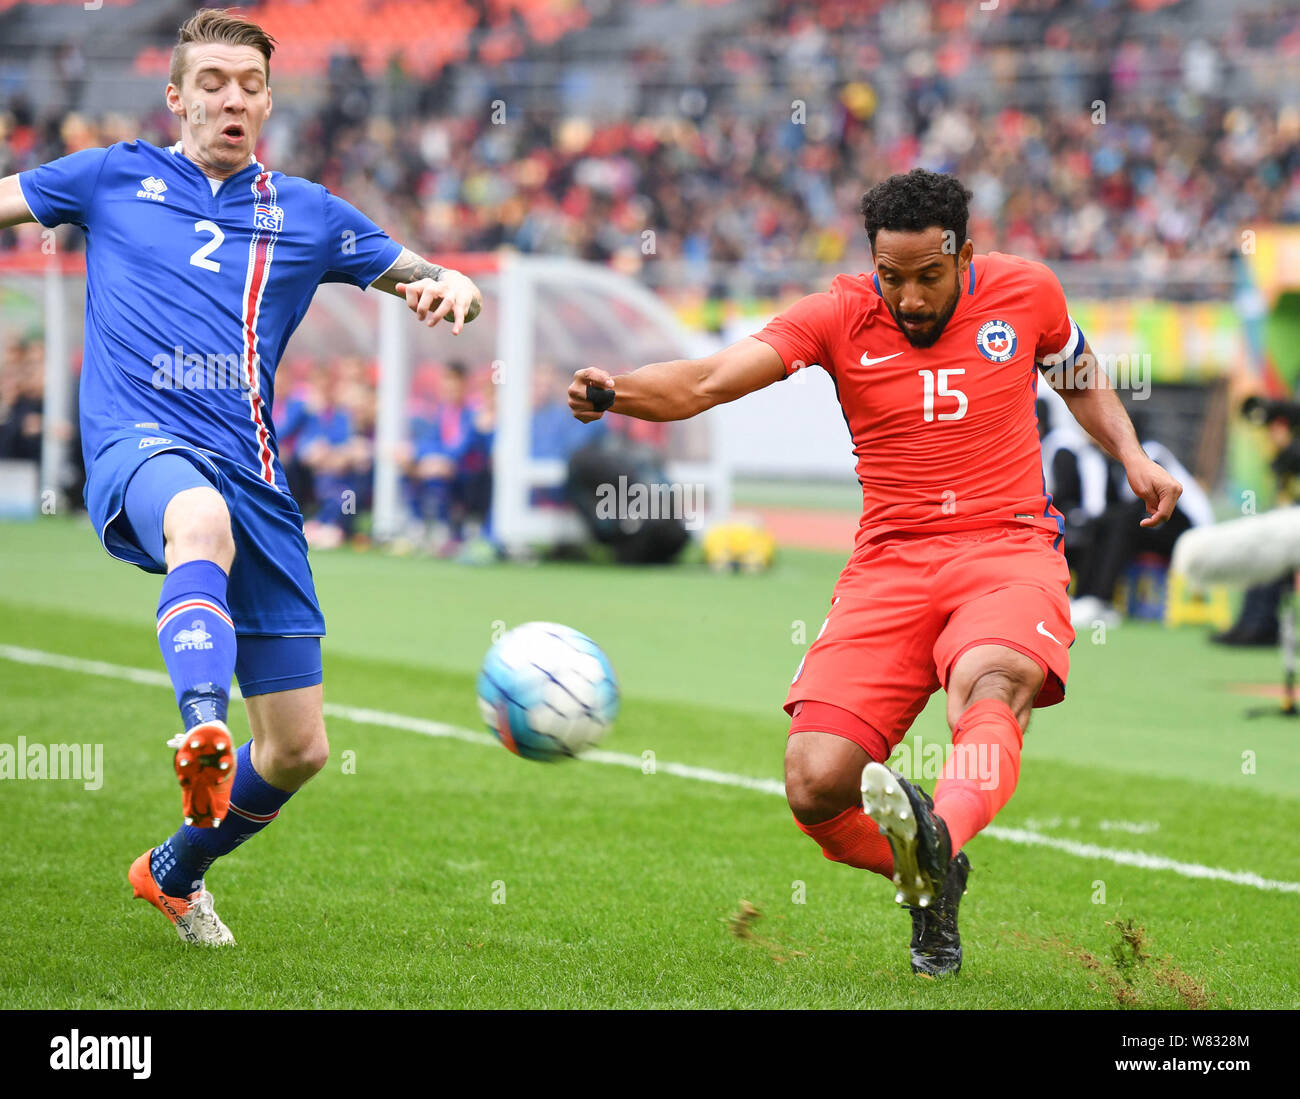 Jean Beausejour of Chile, right, challenges a player of Iceland in their final match during the 2017 Gree China Cup International Football Championshi Stock Photo